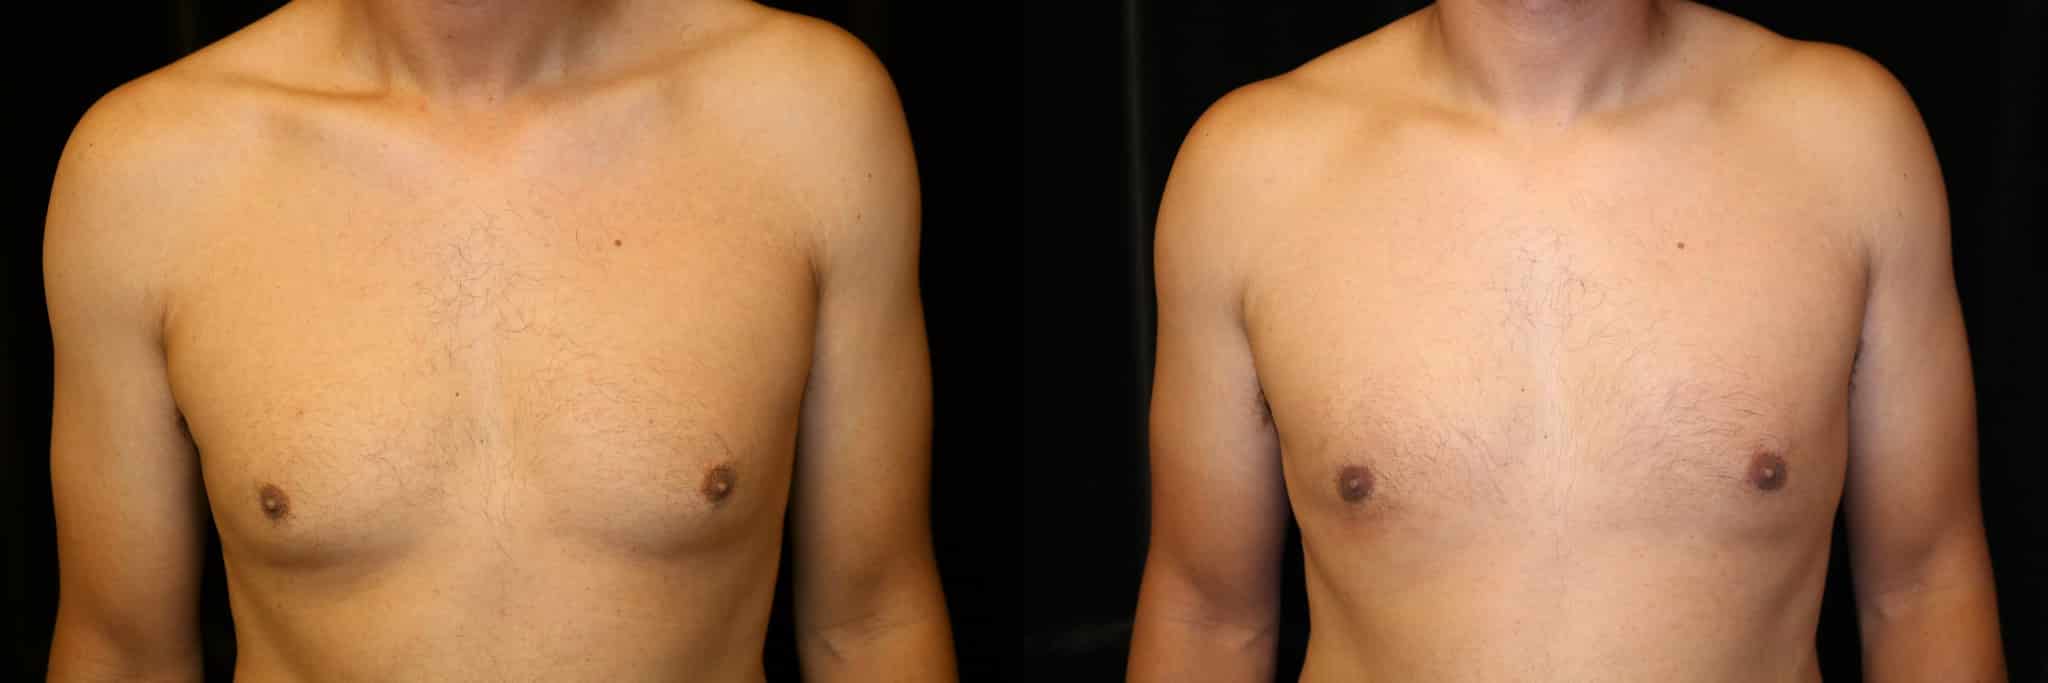 Gynecomastia Patient 3 Before & After